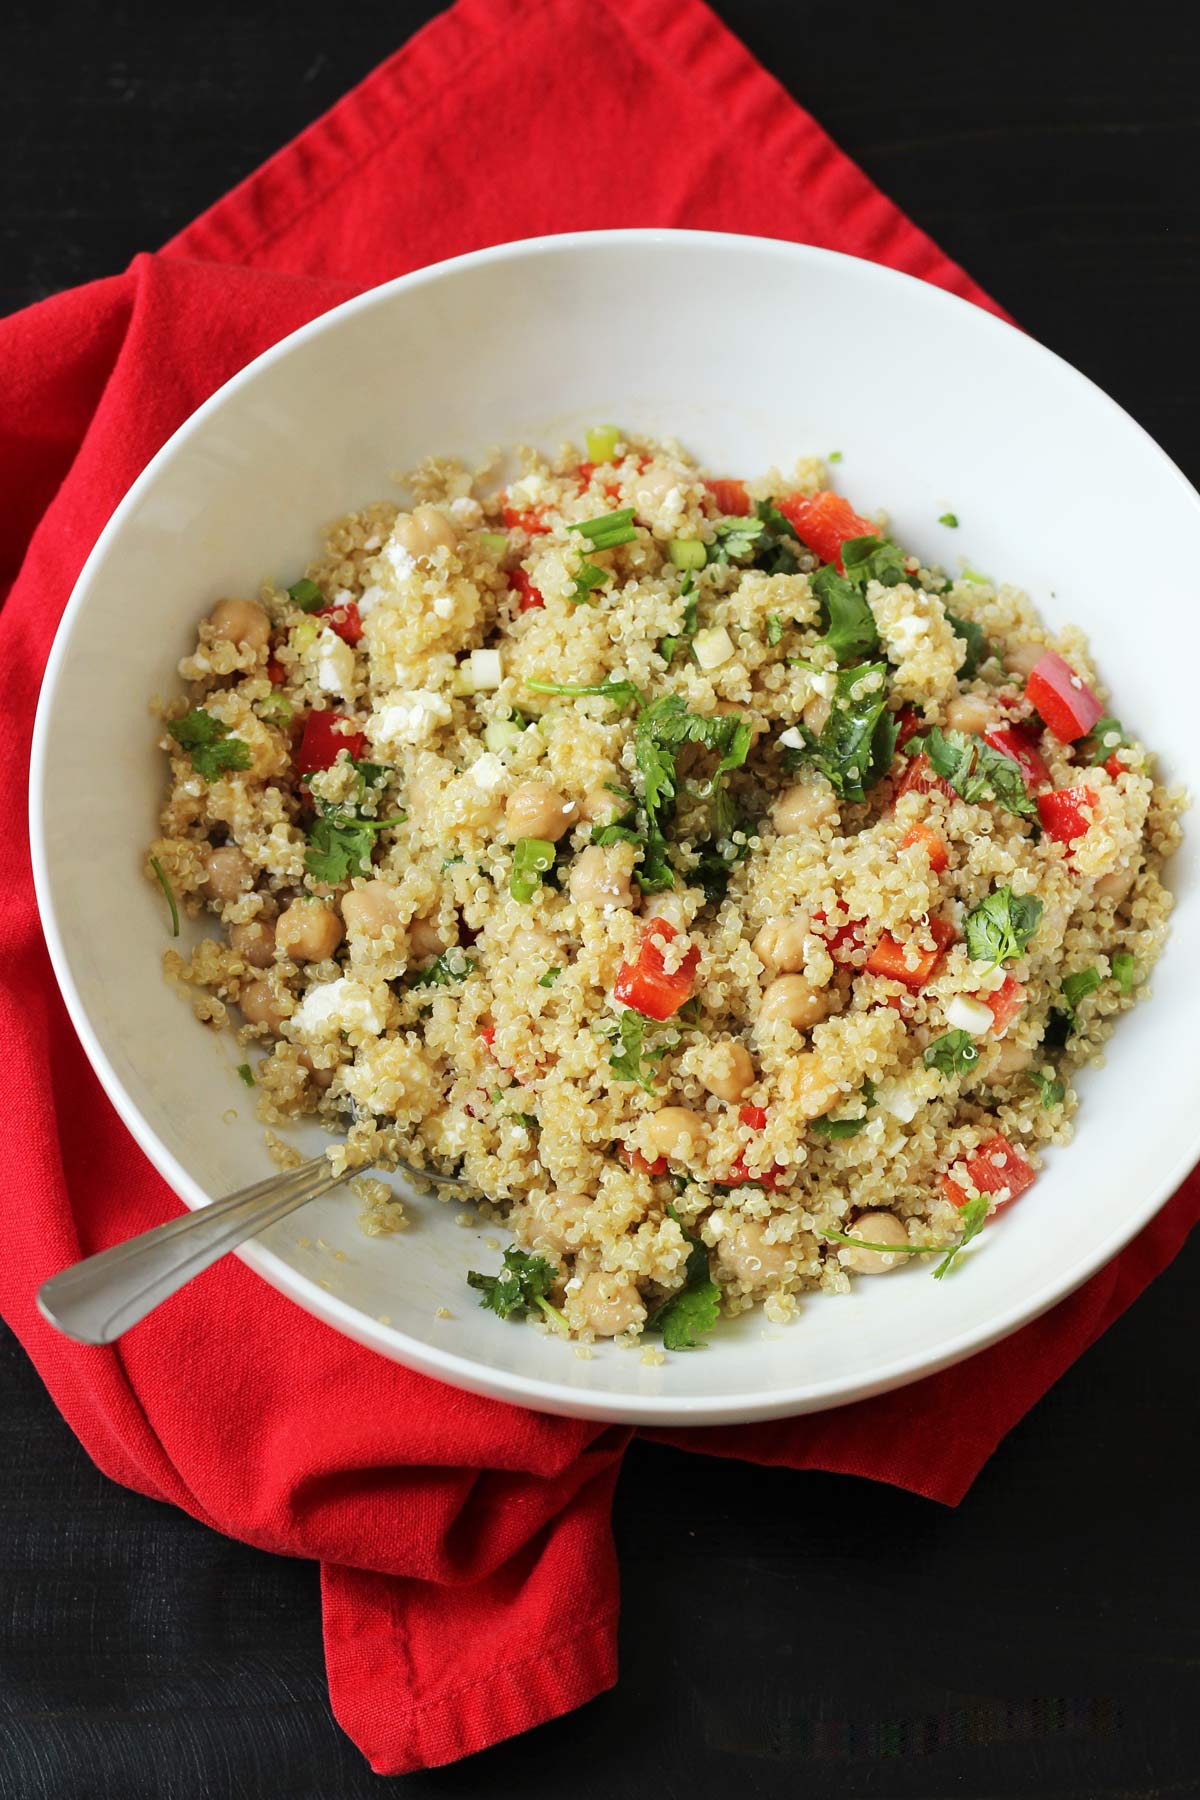 white bowl of quinoa salad on red cloth on black table.